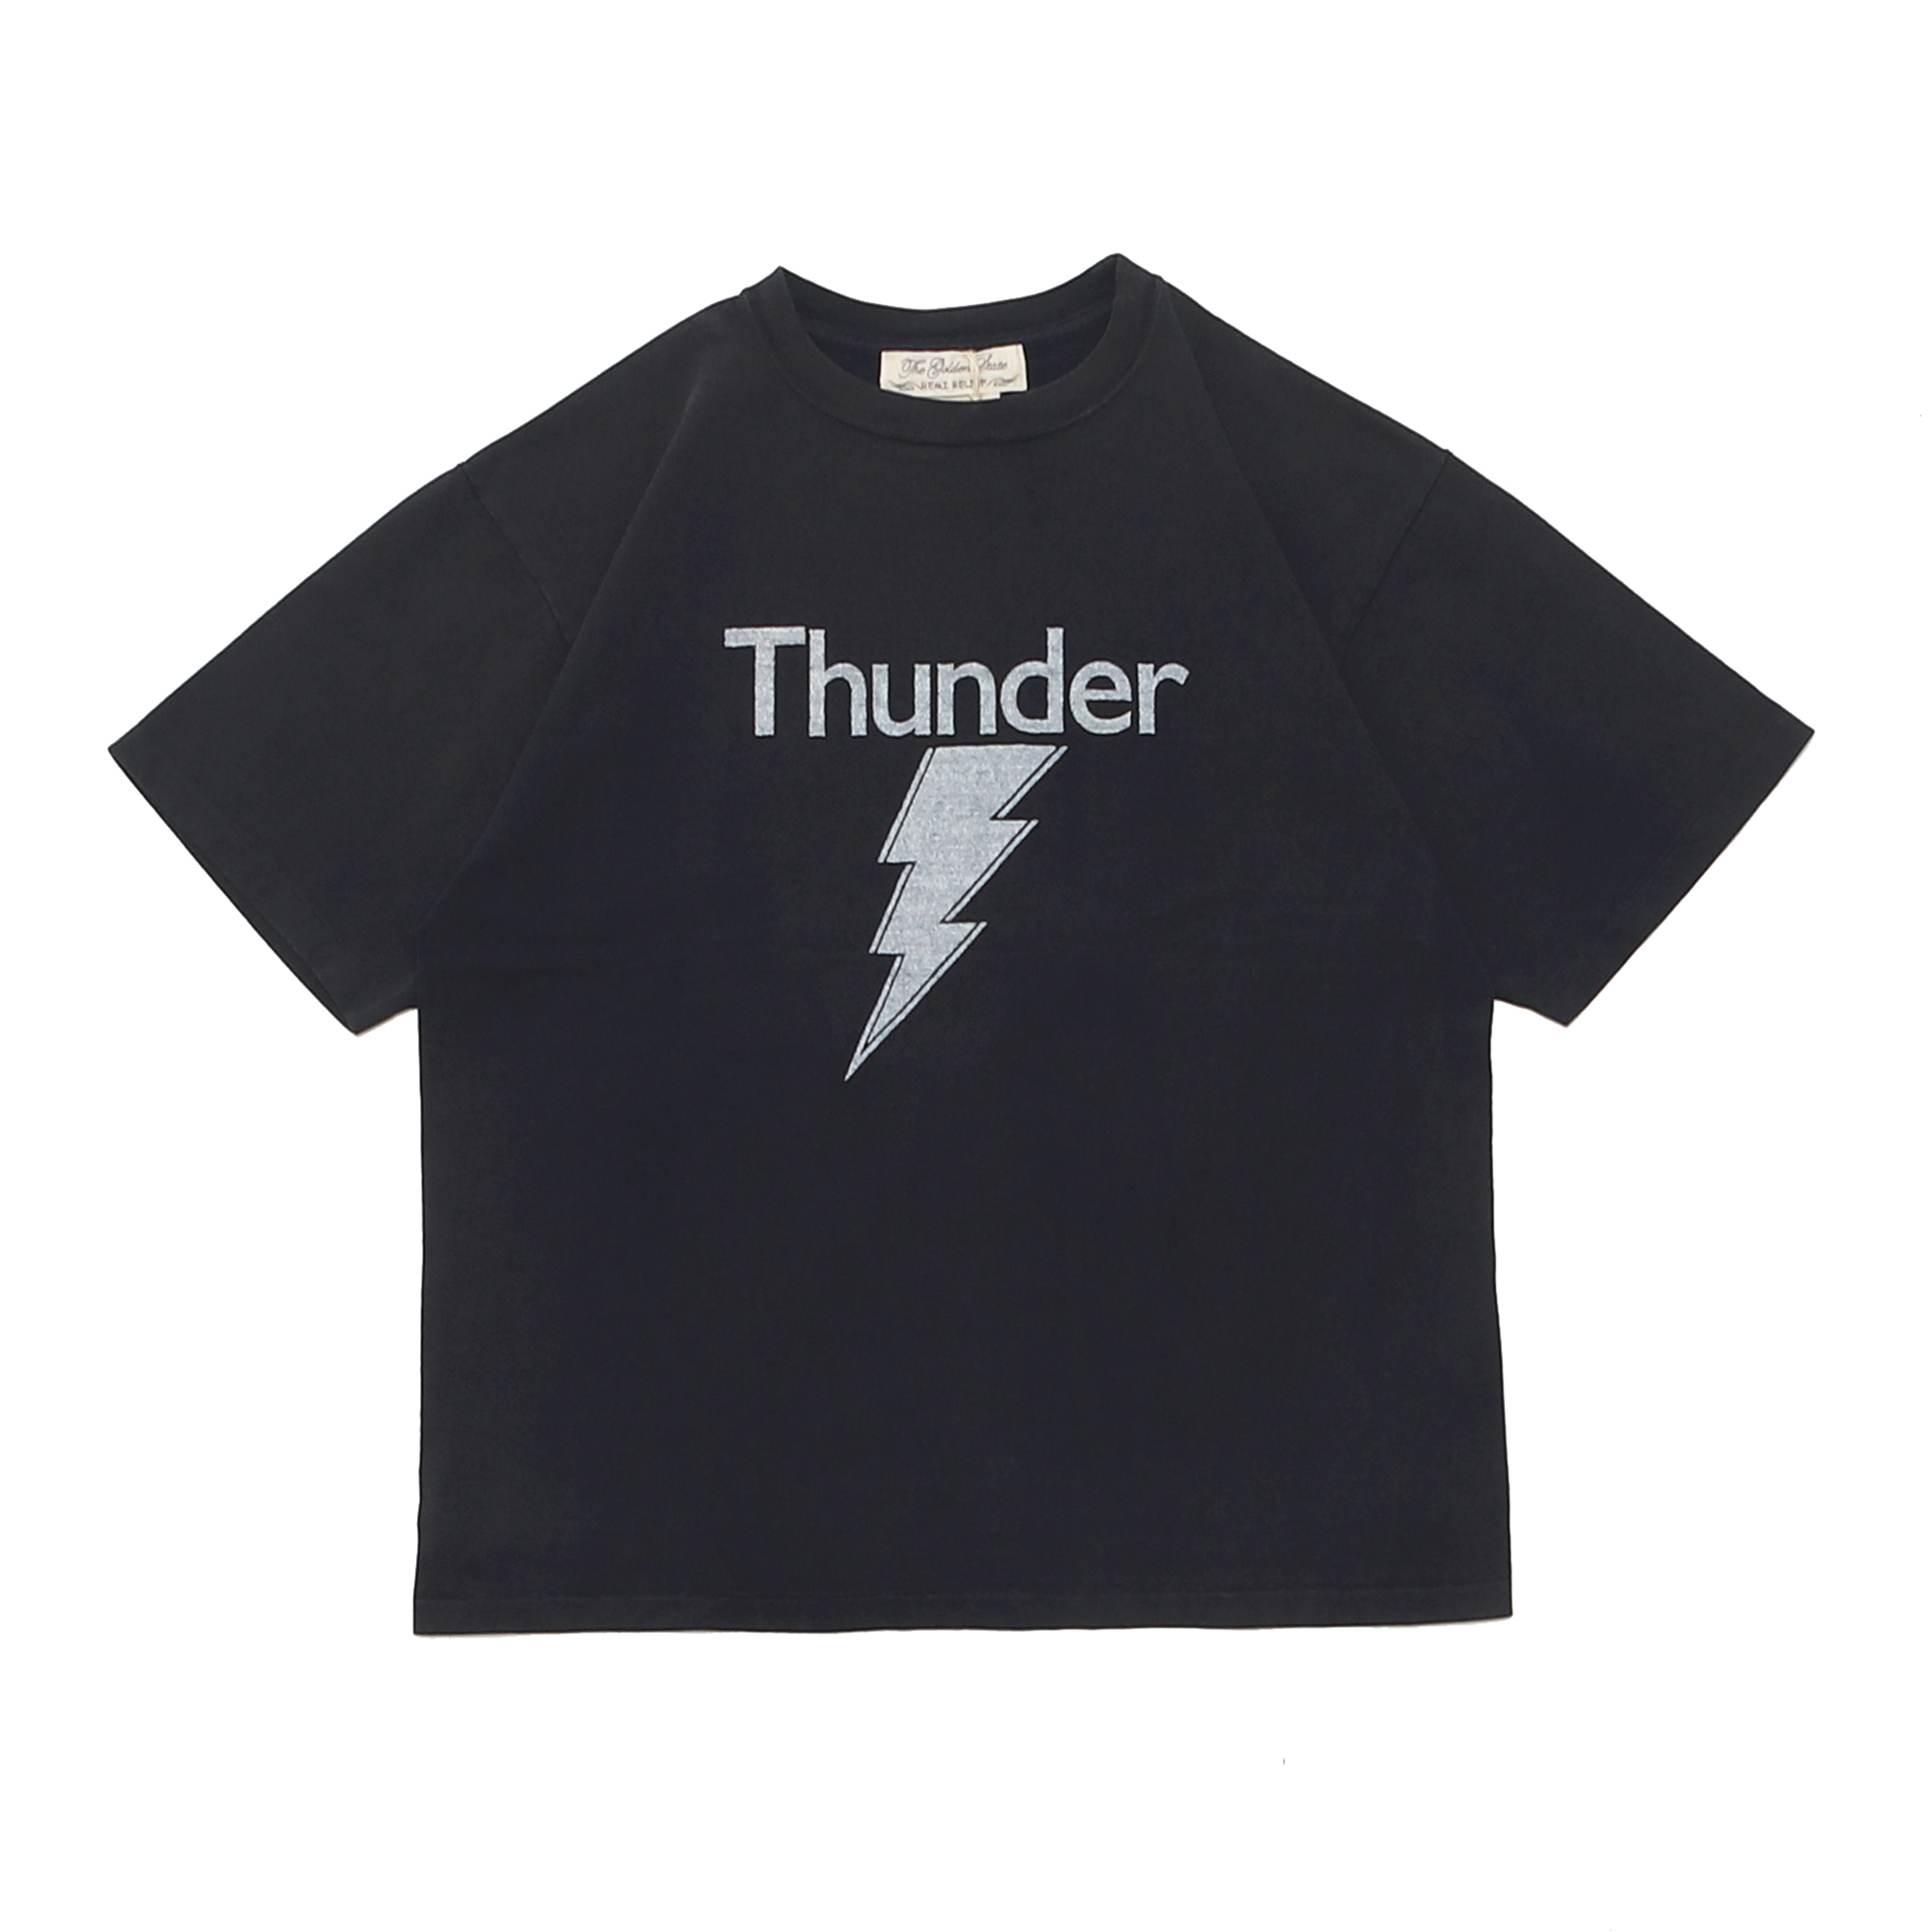 SIDE SEAMLESS JERSEY S/S TEE WITH NEW FINISH - THUNDER BLACK